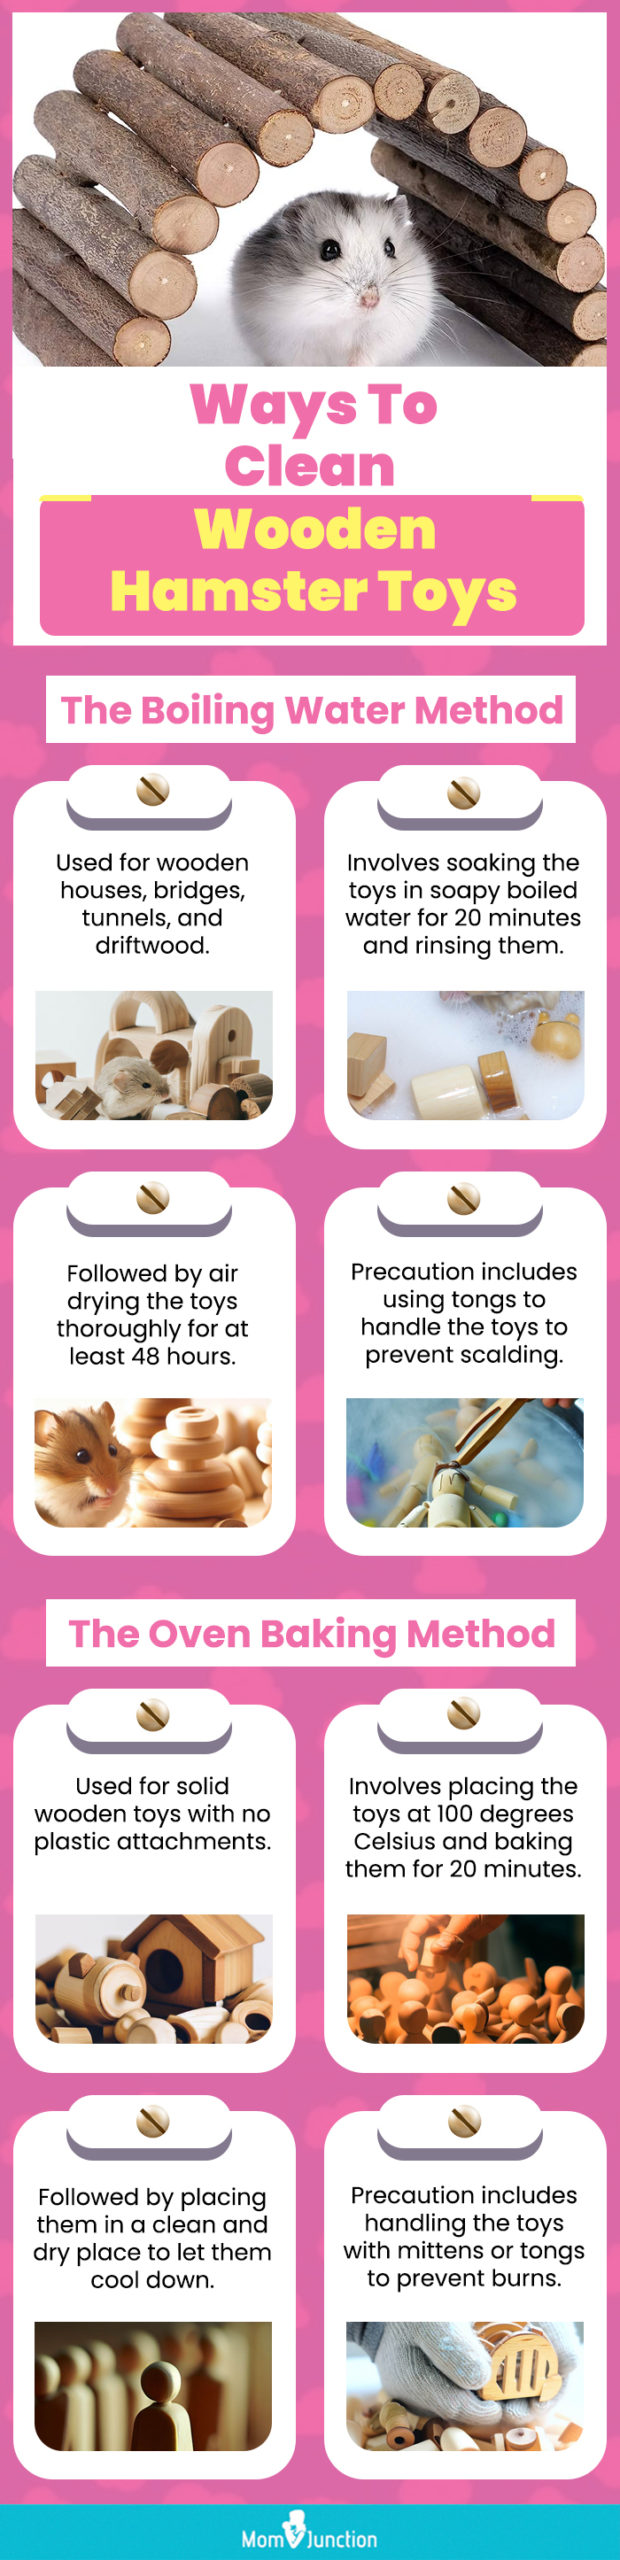  Ways To Clean Wooden Hamster Toys (infographic)